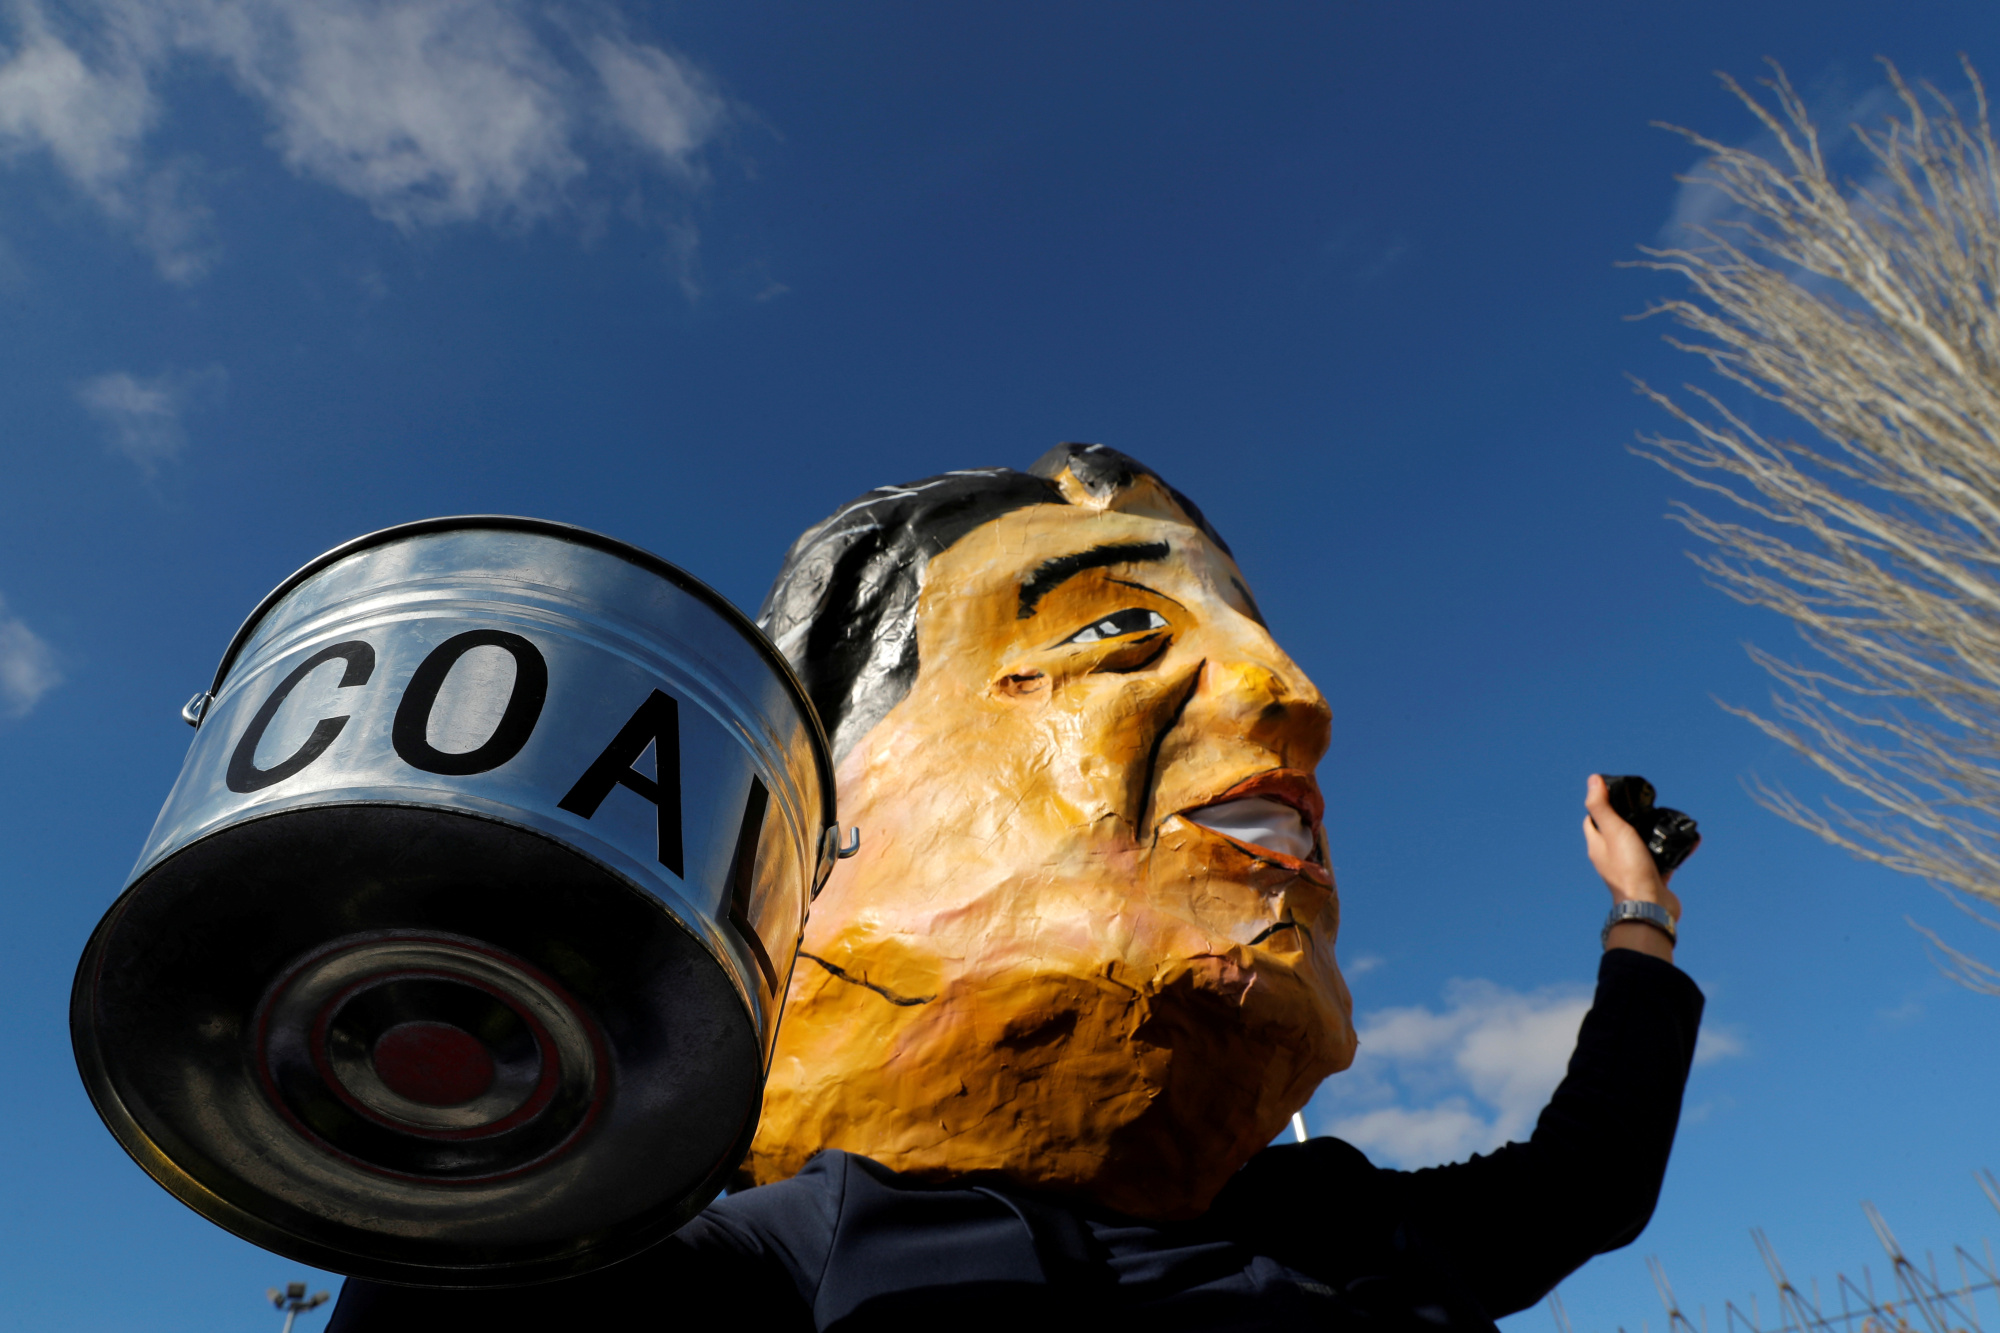 An activist wearing a mask depicting Japan's Prime Minister Shinzo Abe takes part in a protest to demand Japan stop supporting coal, outside the venue of the U.N. climate change conference (COP25) in Madrid in December. | REUTERS